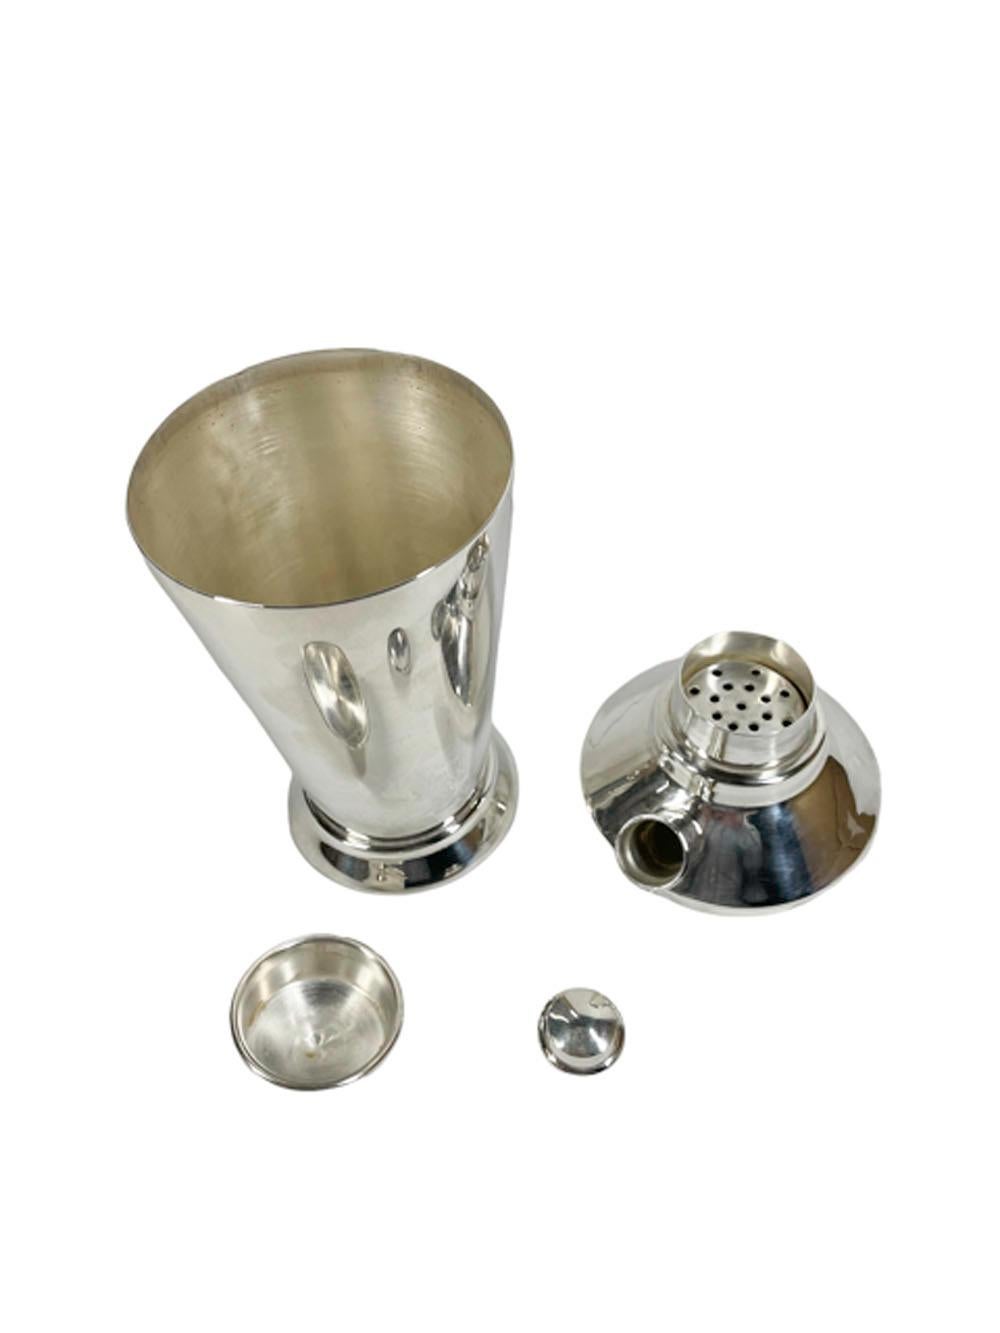 Art Deco Silver Plate Cocktail Shaker with Center Pour and Side Spout Lid For Sale 2